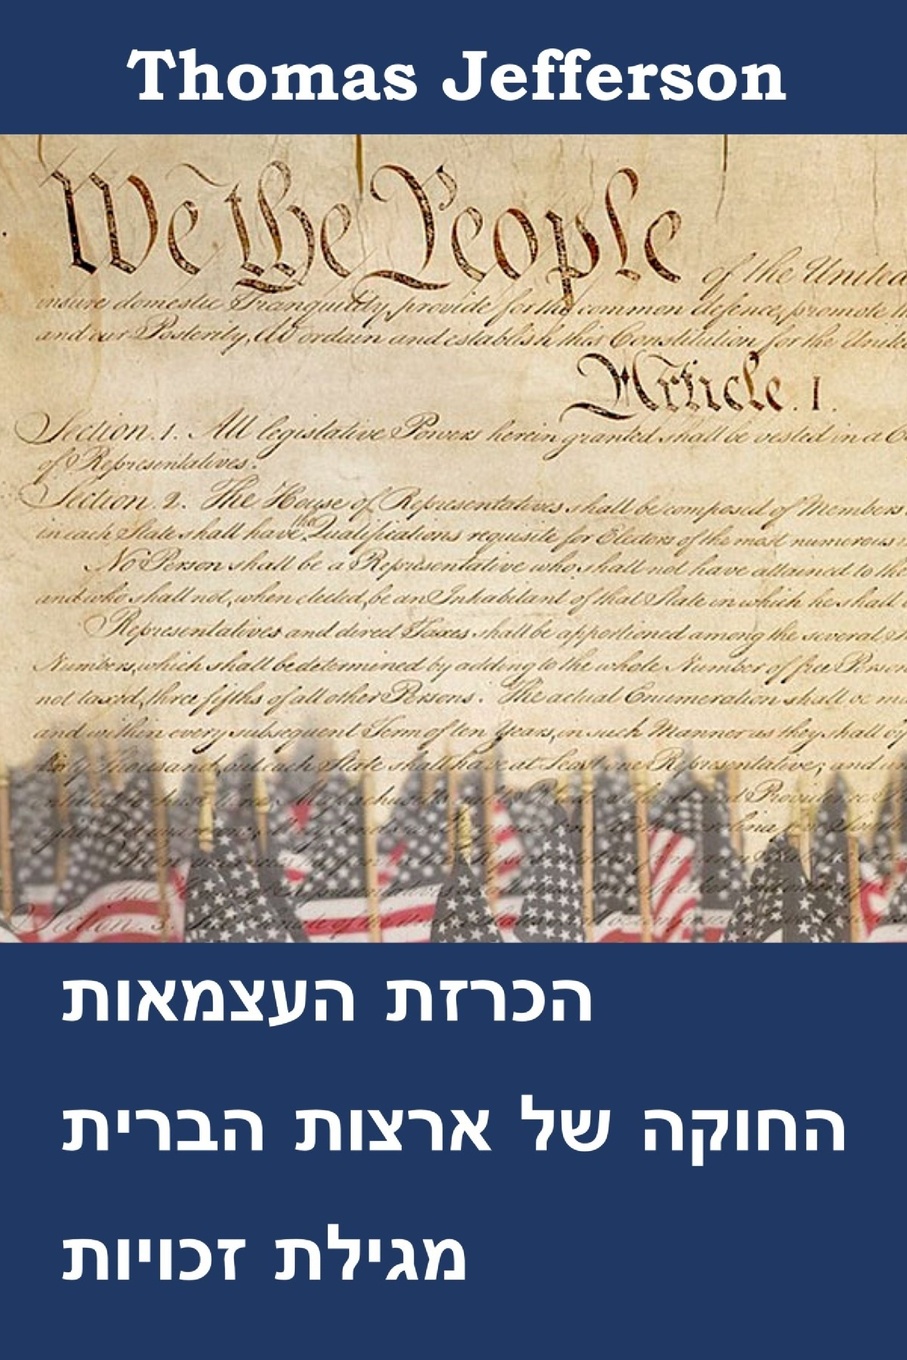 ????? ???????, ????? ????? ??????? ?? ????? ????? ?? ??????. Declaration of Independence, Constitution, and Bill of Rights of the United States of America, Hebrew edition